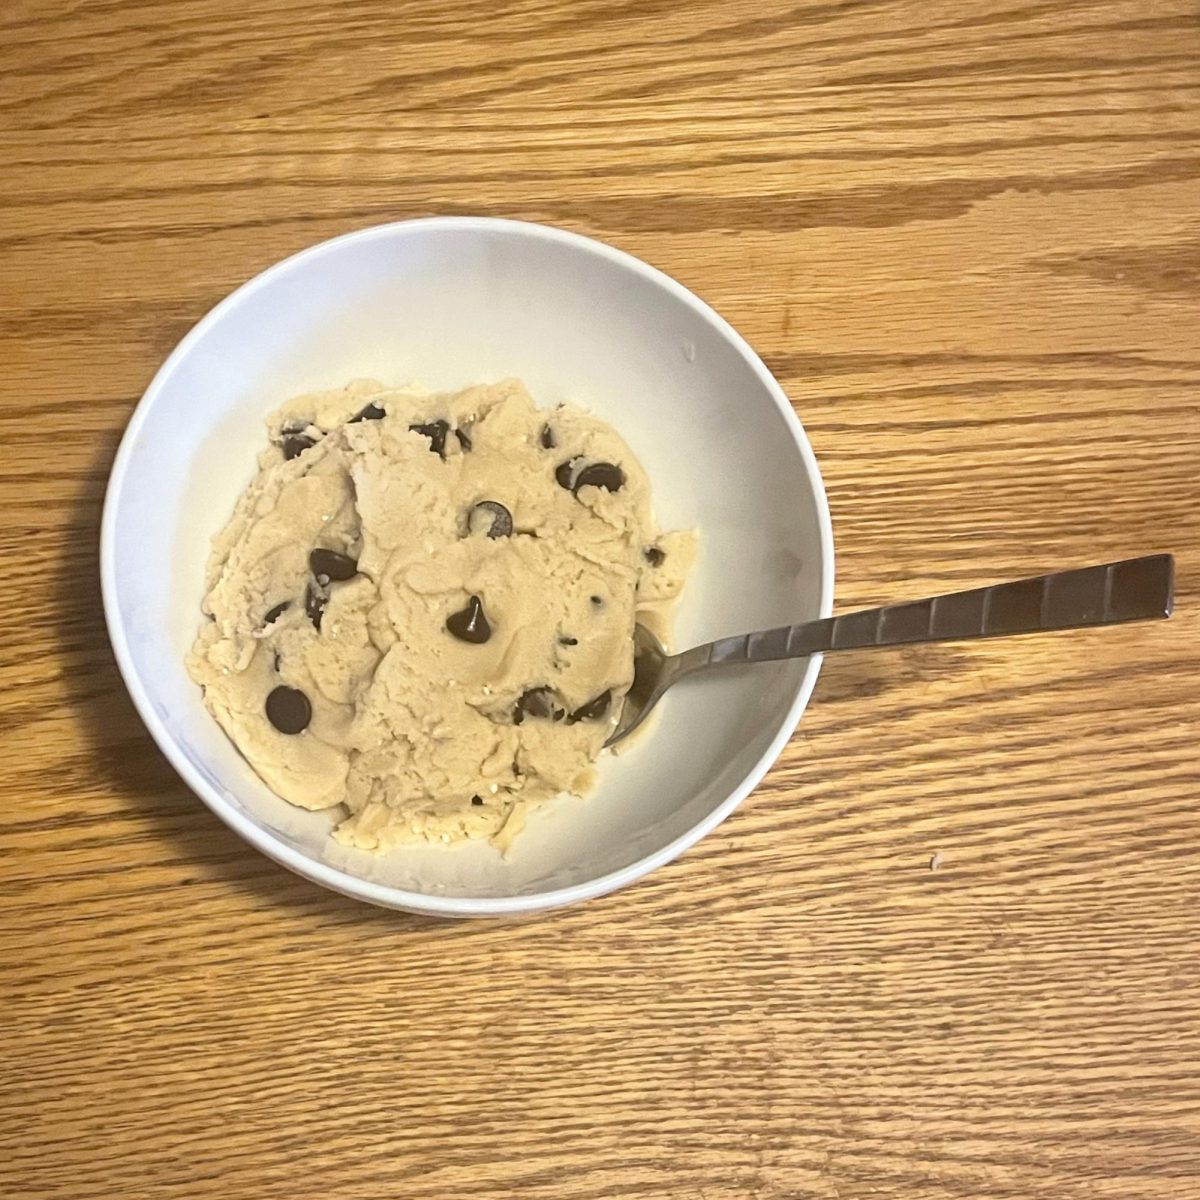 After just one bite of this cookie dough, it will quickly become your not-so-guilty pleasure as it is completely safe to eat!